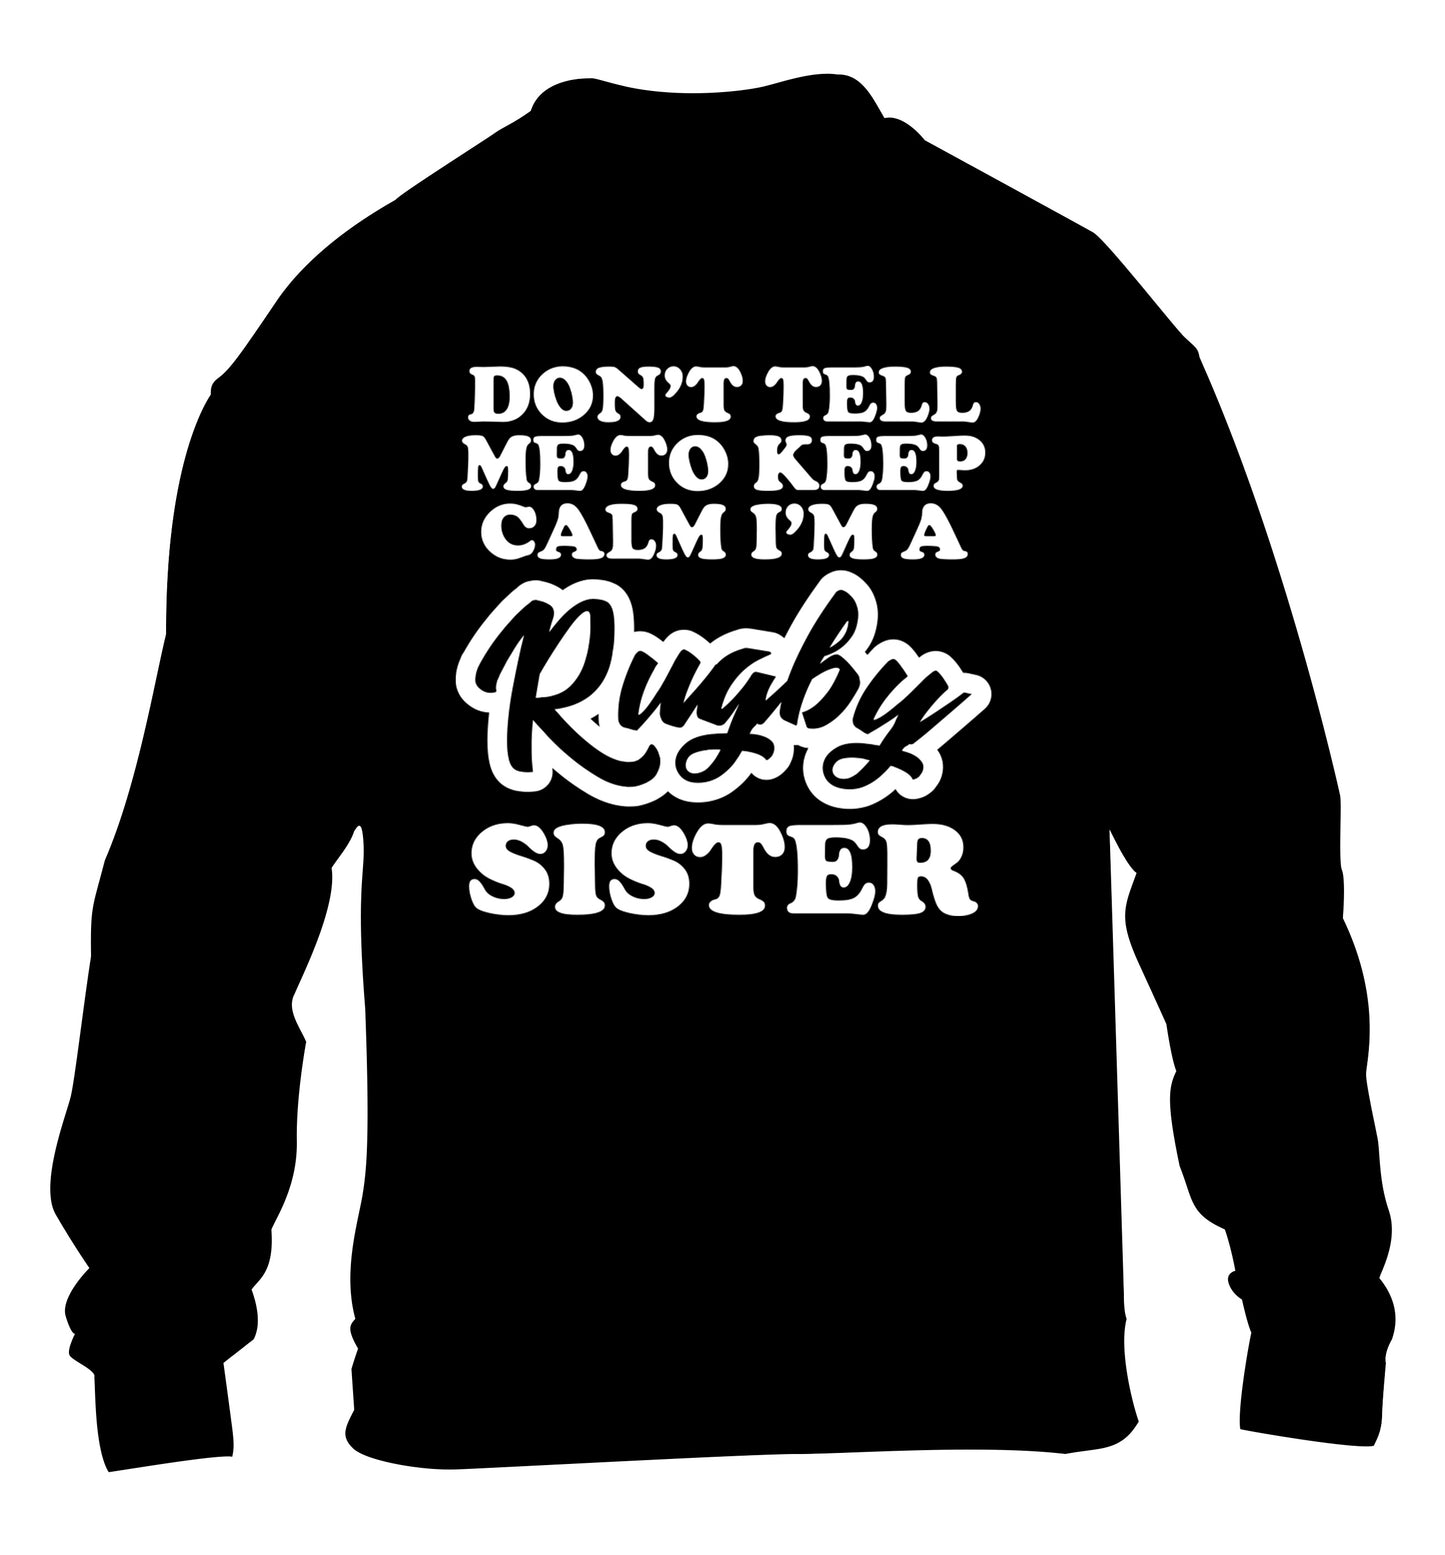 Don't tell me keep calm I'm a rugby sister children's black sweater 12-13 Years